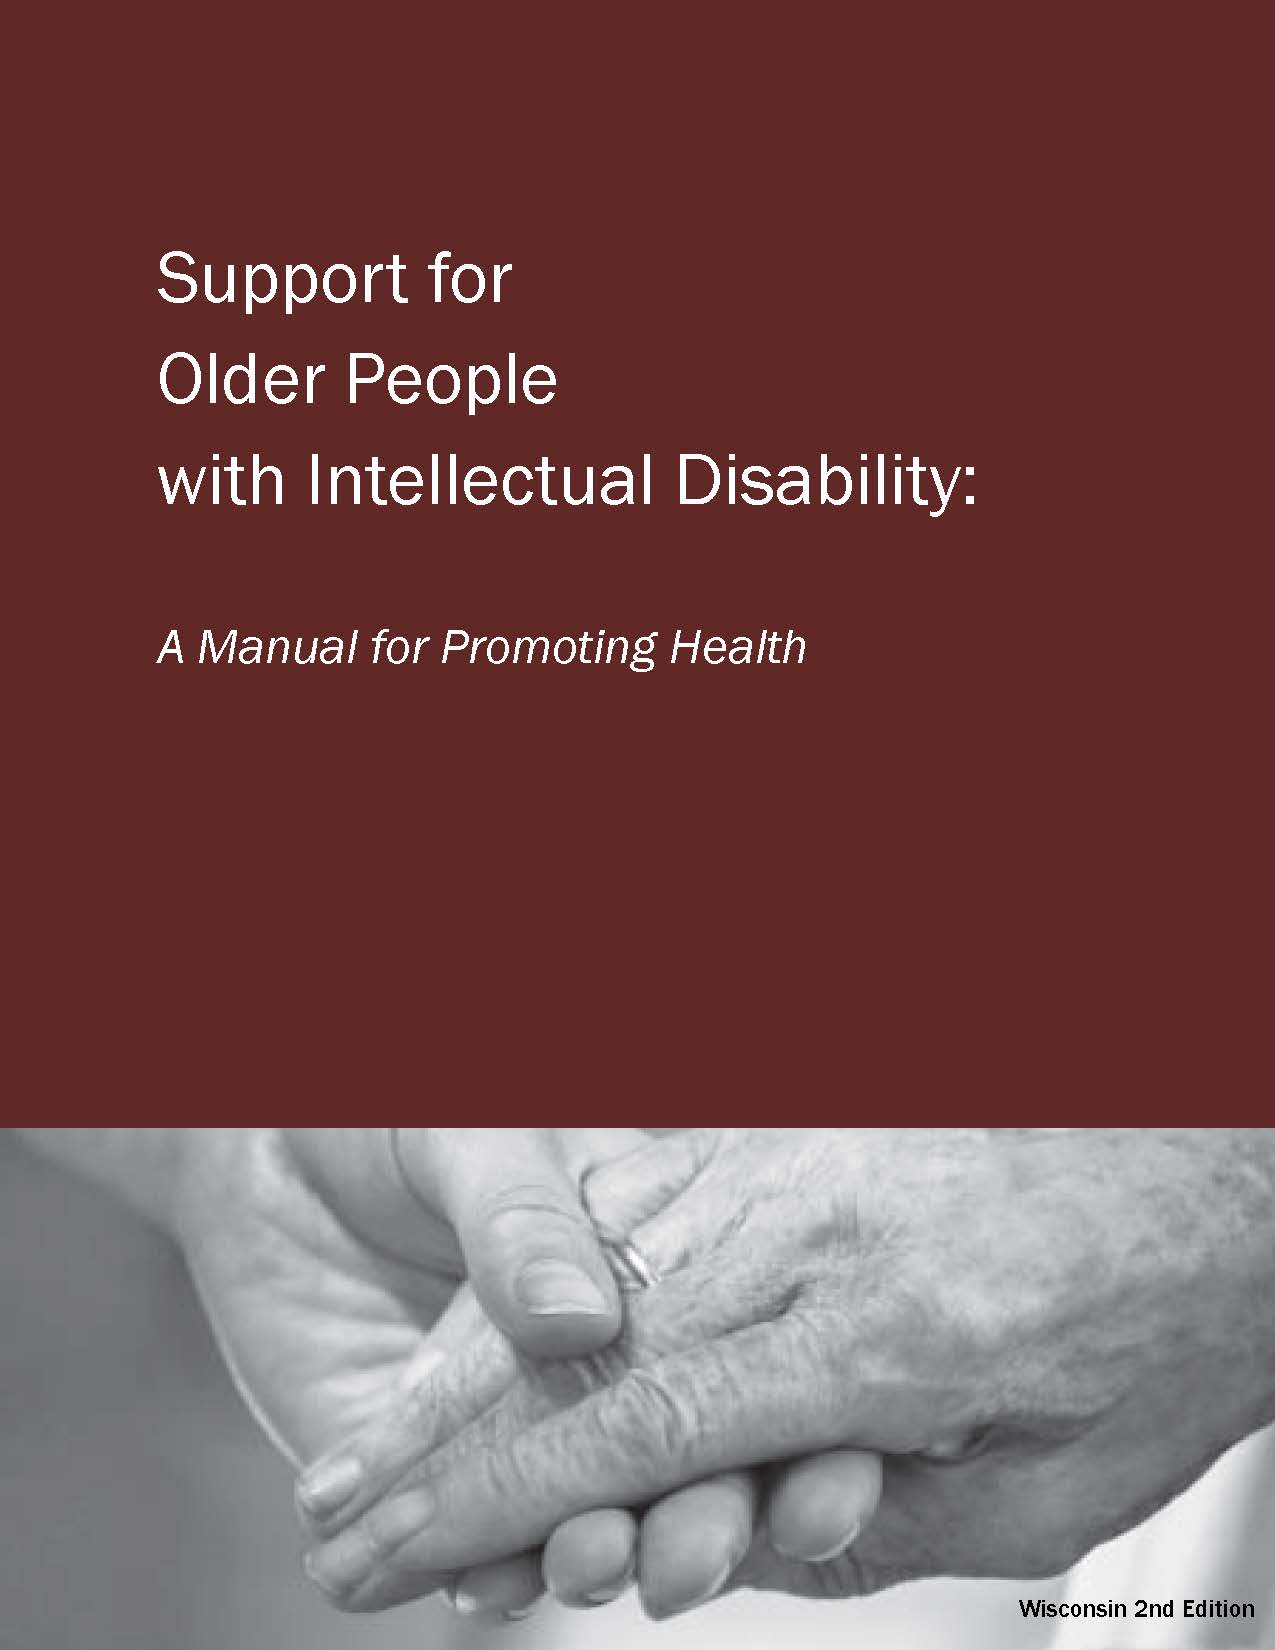 Support for Older People with Intellectual Disability - Wisconsin